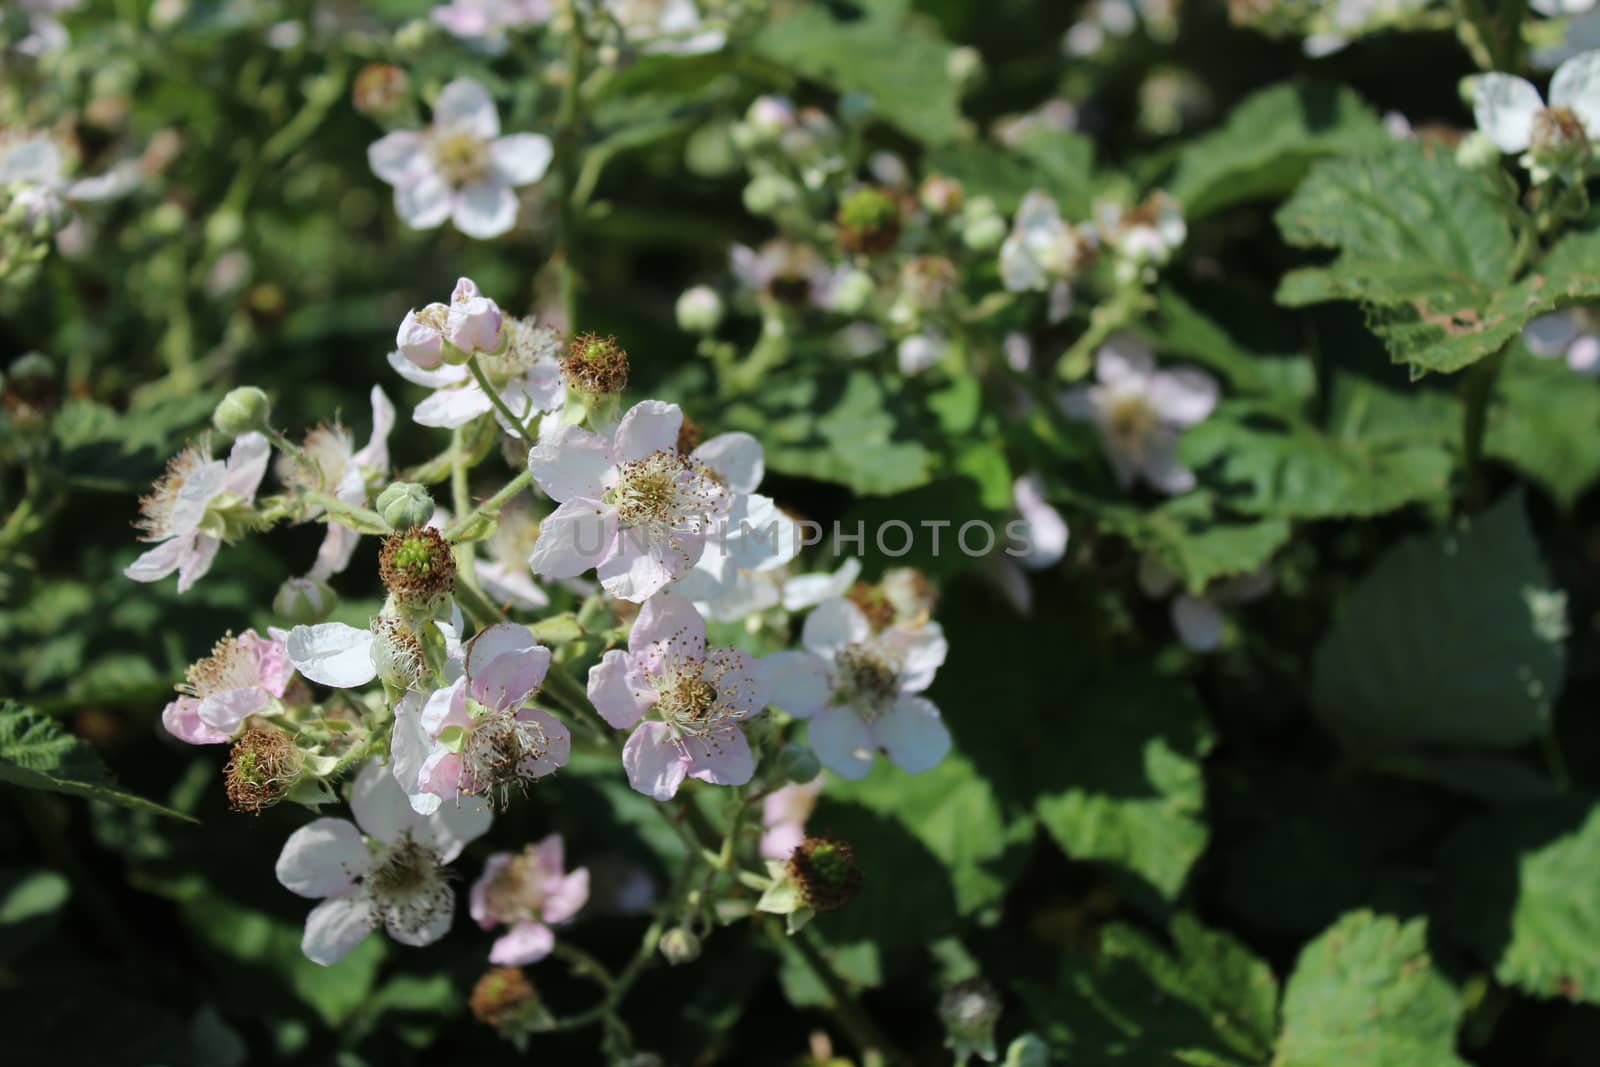 blackberry bush with many blossoms by martina_unbehauen